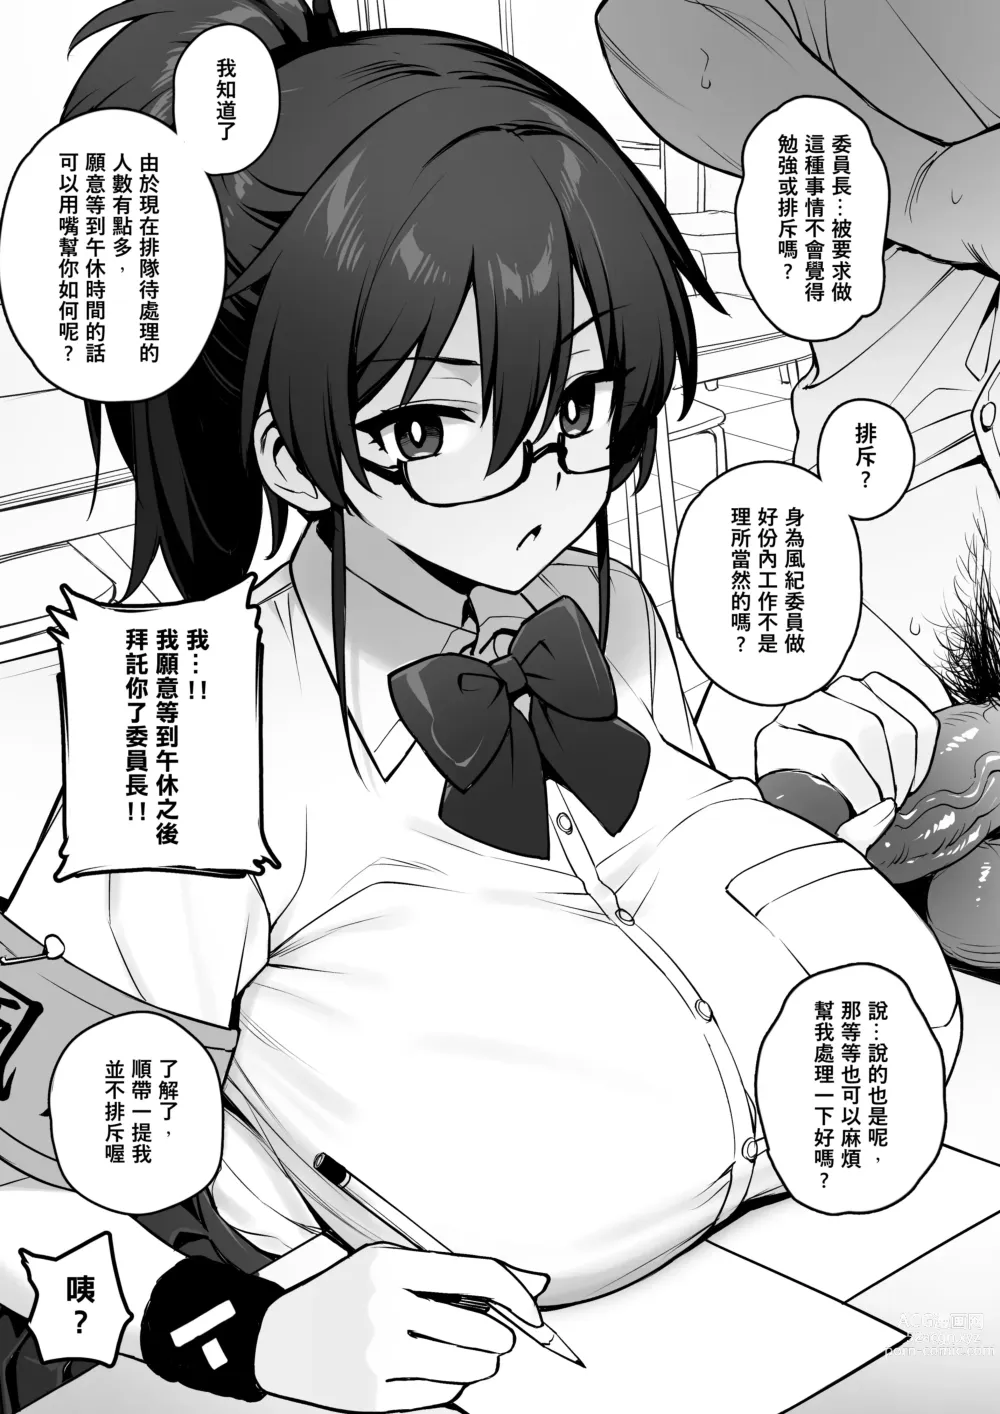 Page 8 of doujinshi That new president of the public morals committee got really massive breasts.